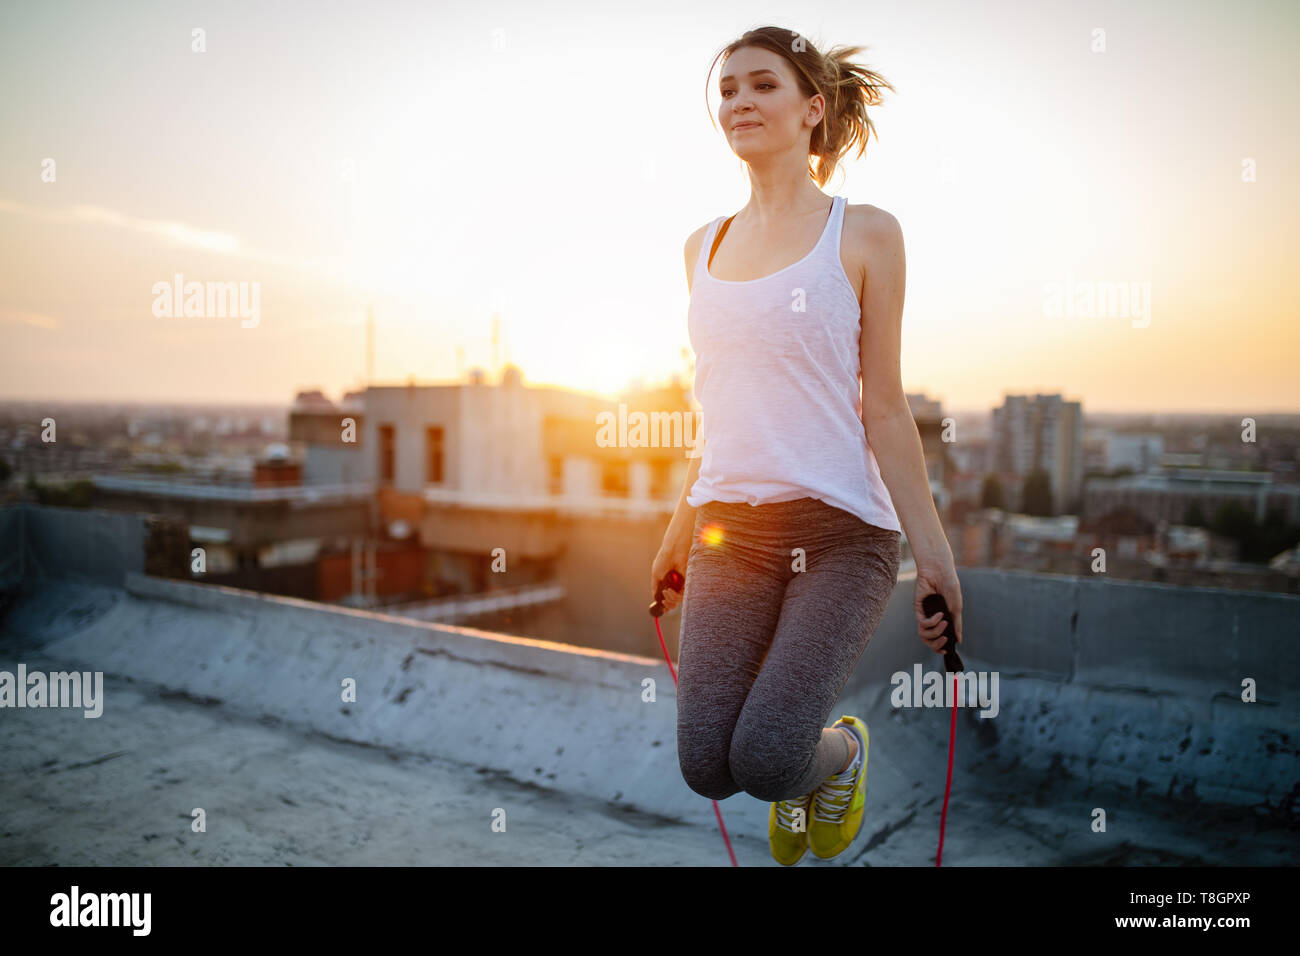 Portrait of fit young woman with jump rope on rooftop. Fitness female doing skipping workout outdoors on a sunny day. Stock Photo